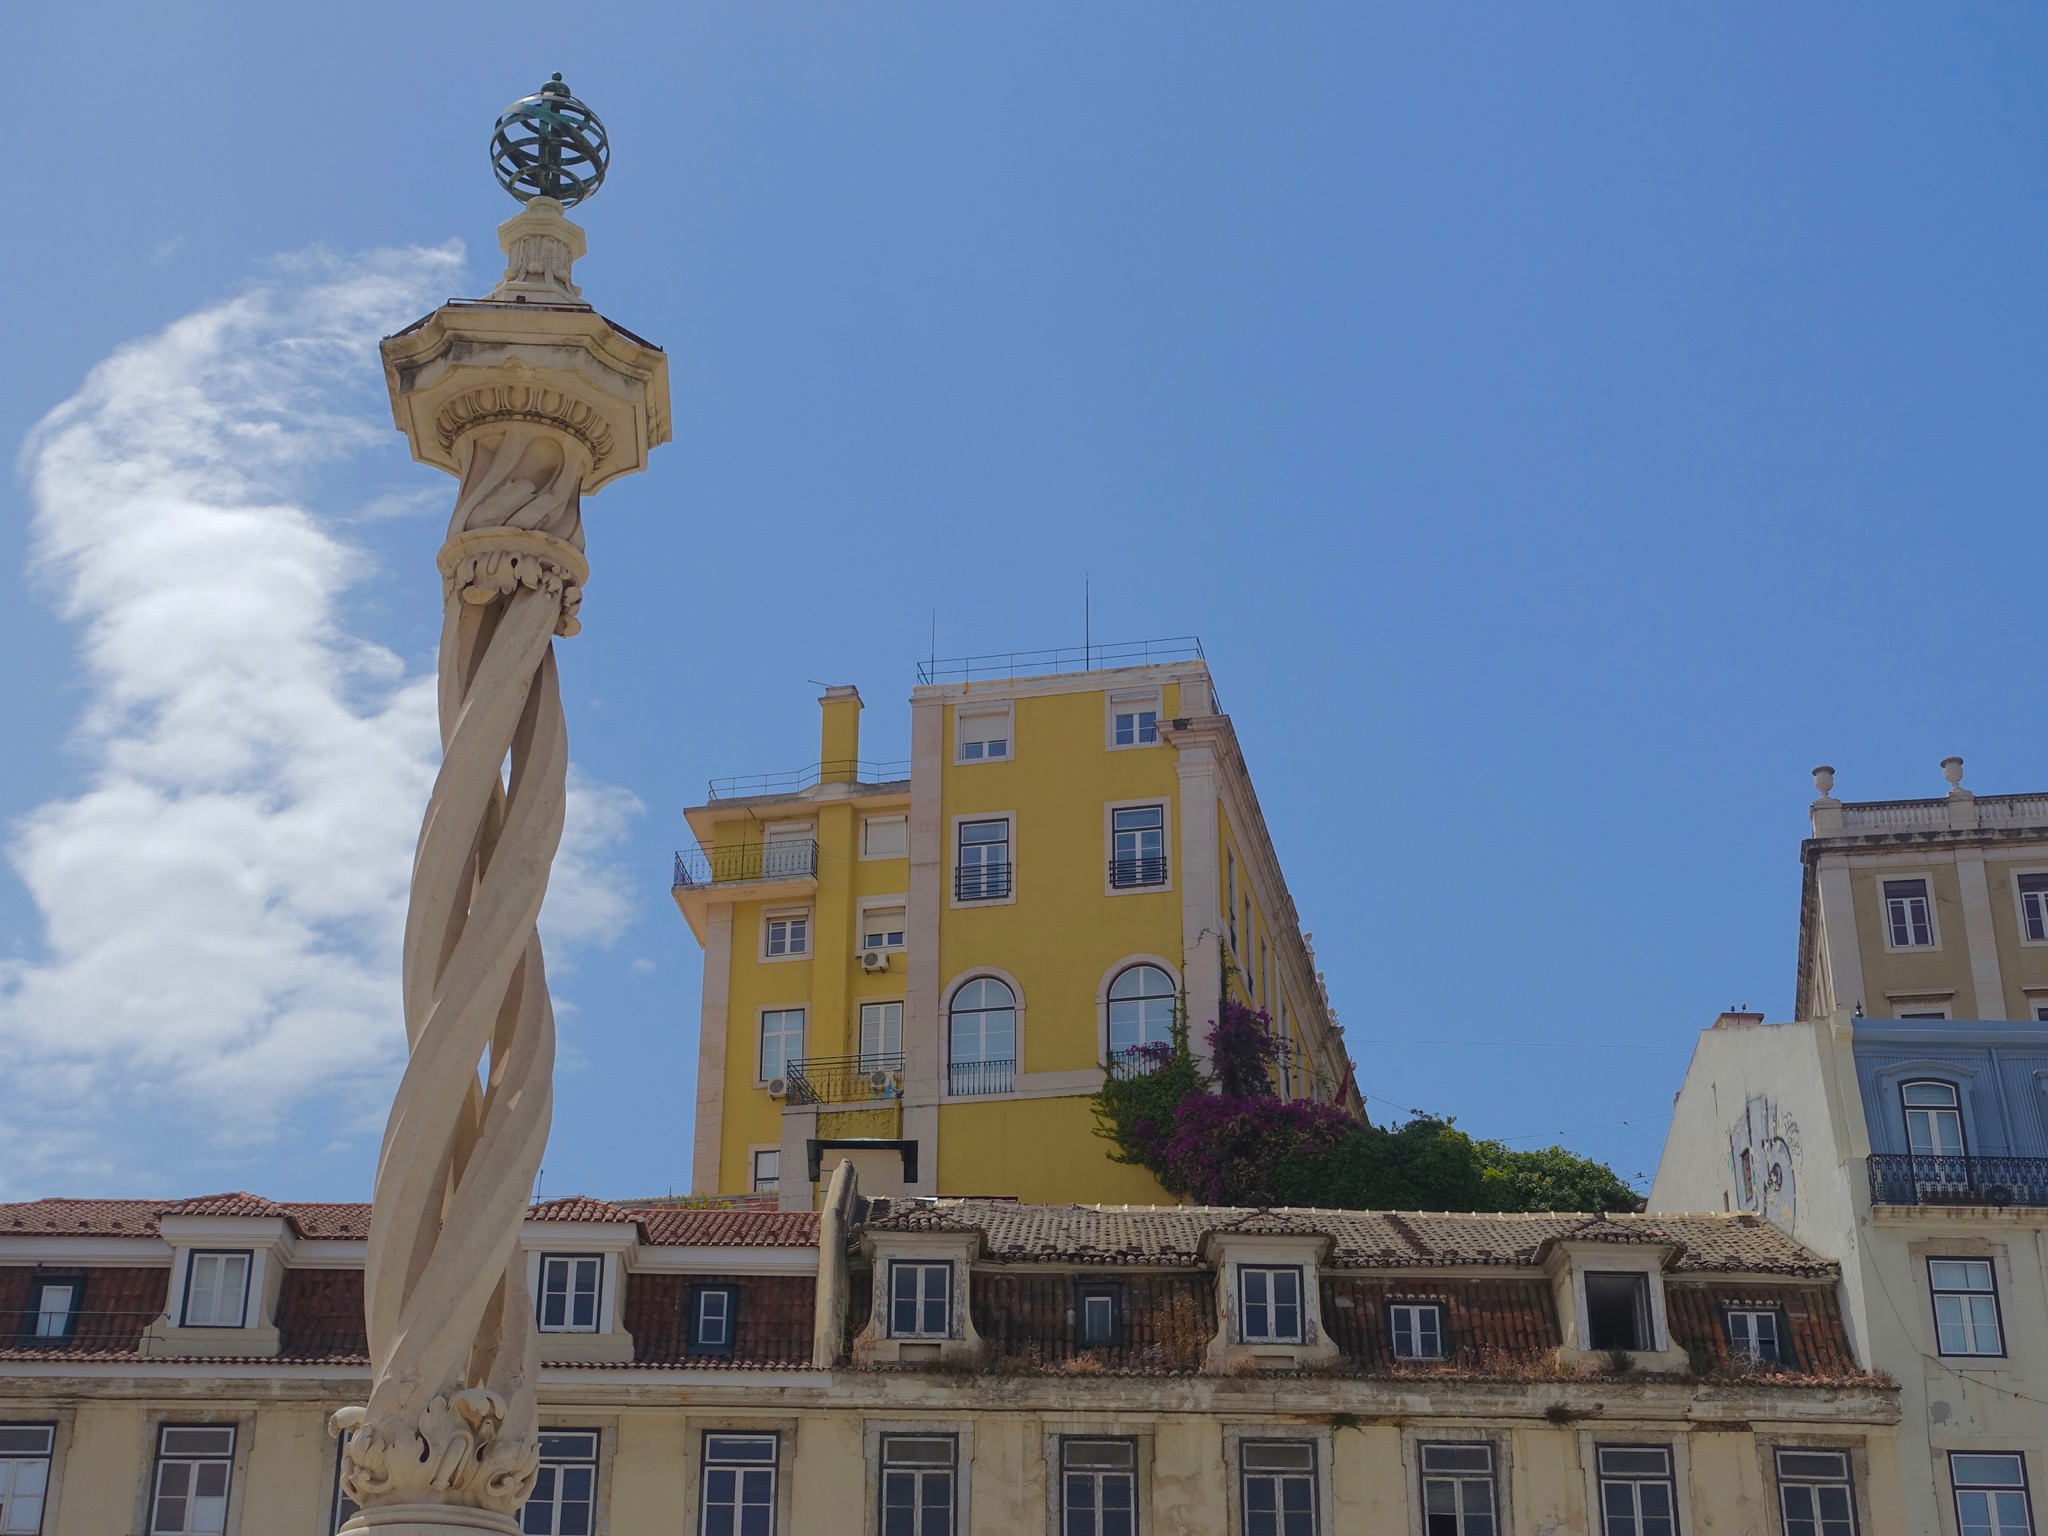 Photo 54 of 86 from the album Highlights Lisbon 2015.